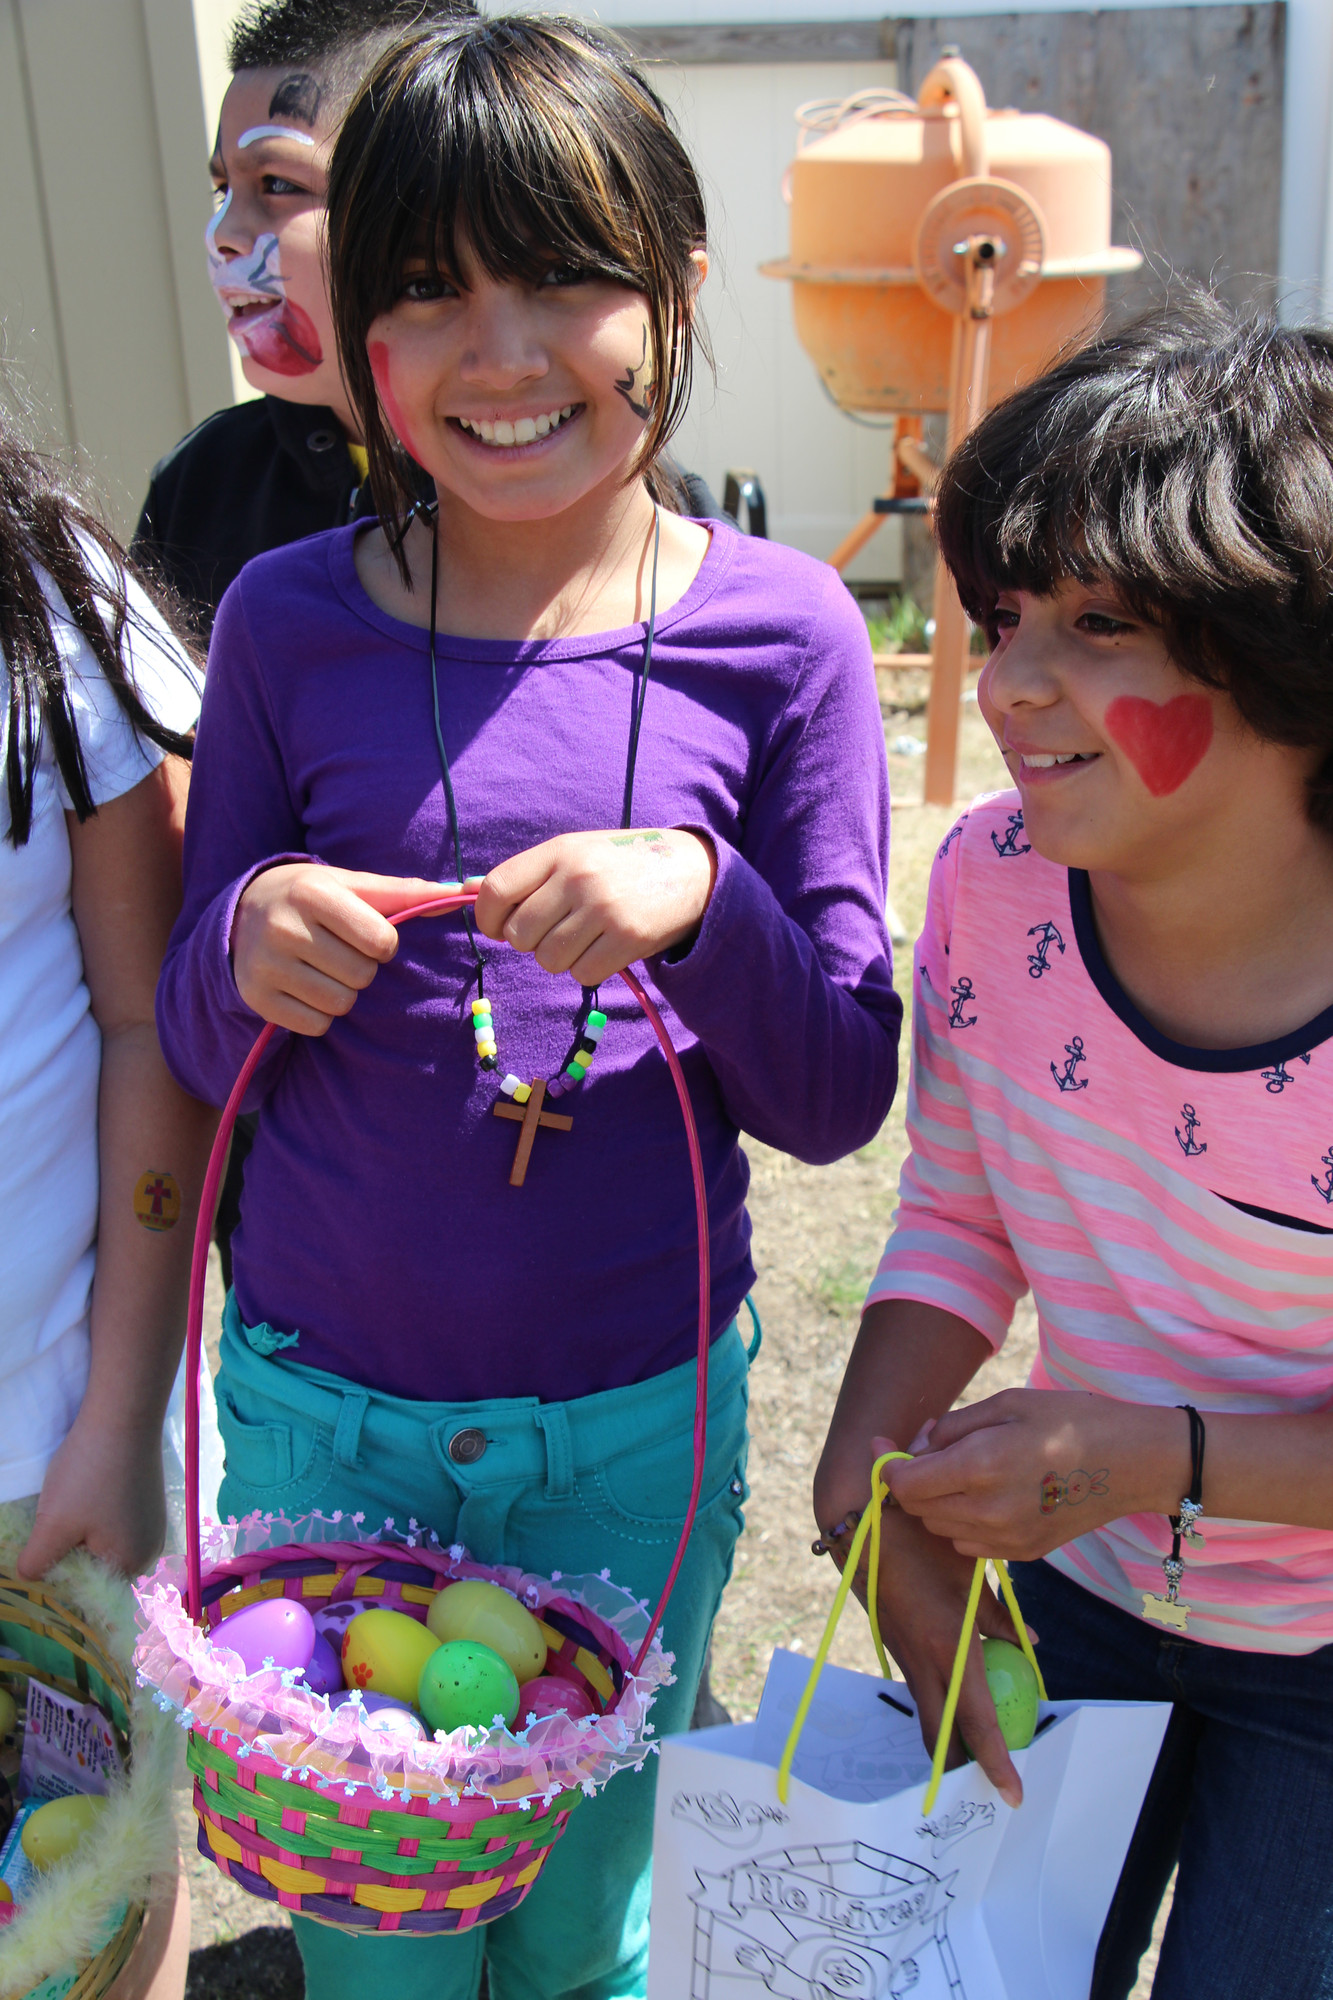 Rudy Malik, 9, above left, with her friend Mimari Velasquez, 9, collected eggs during the South Nassau Christian Church Easter Egg Hunt on April 19.